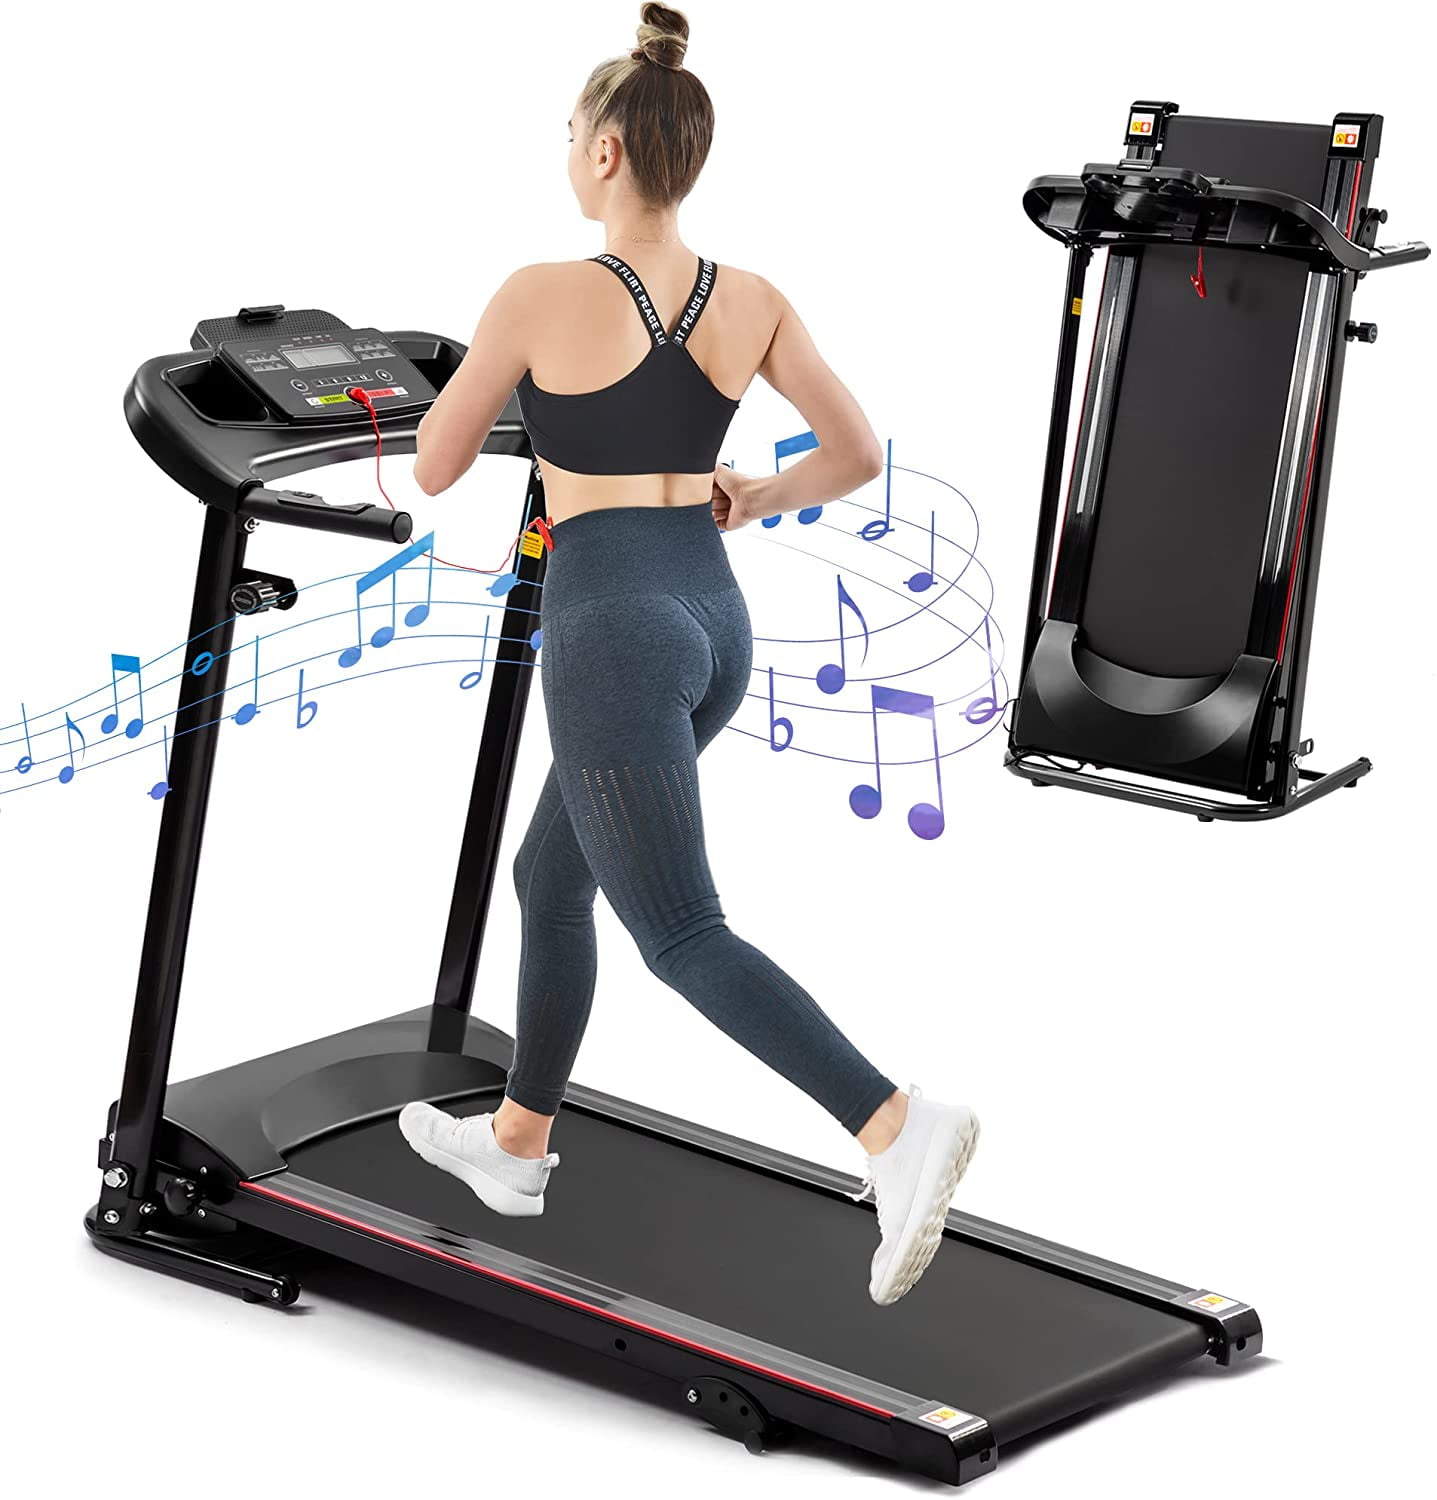 Aceshin Folding Portable Electric Treadmill Low Noise Running Machine with Smartphone APP Control for Home Gym Exercise 